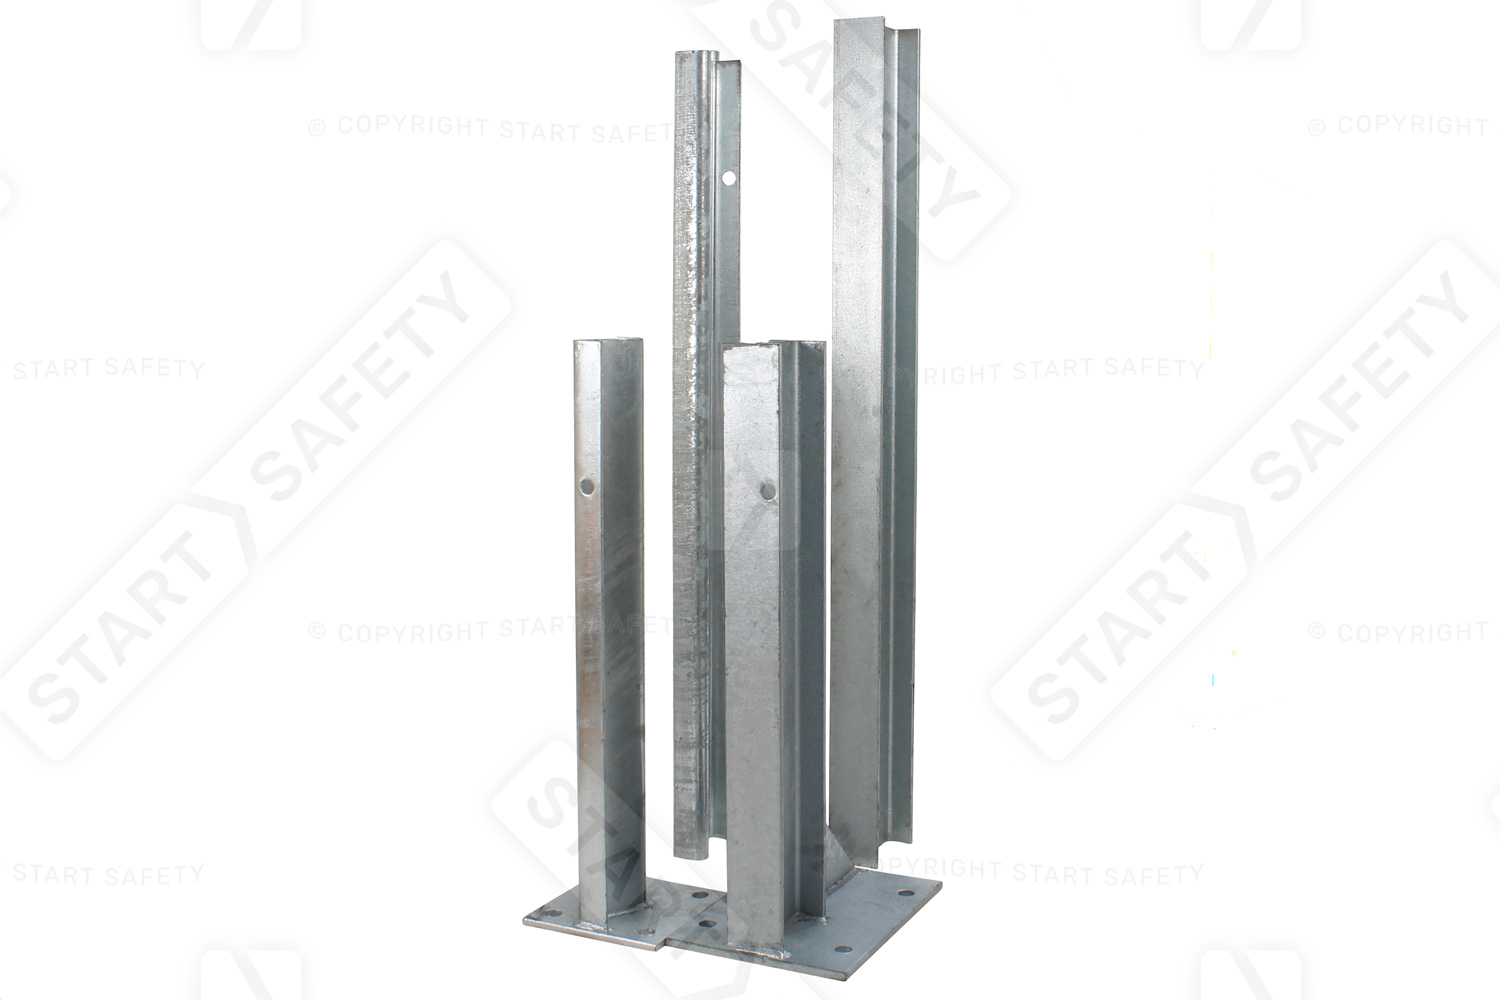 Group Shot Of Armco Posts